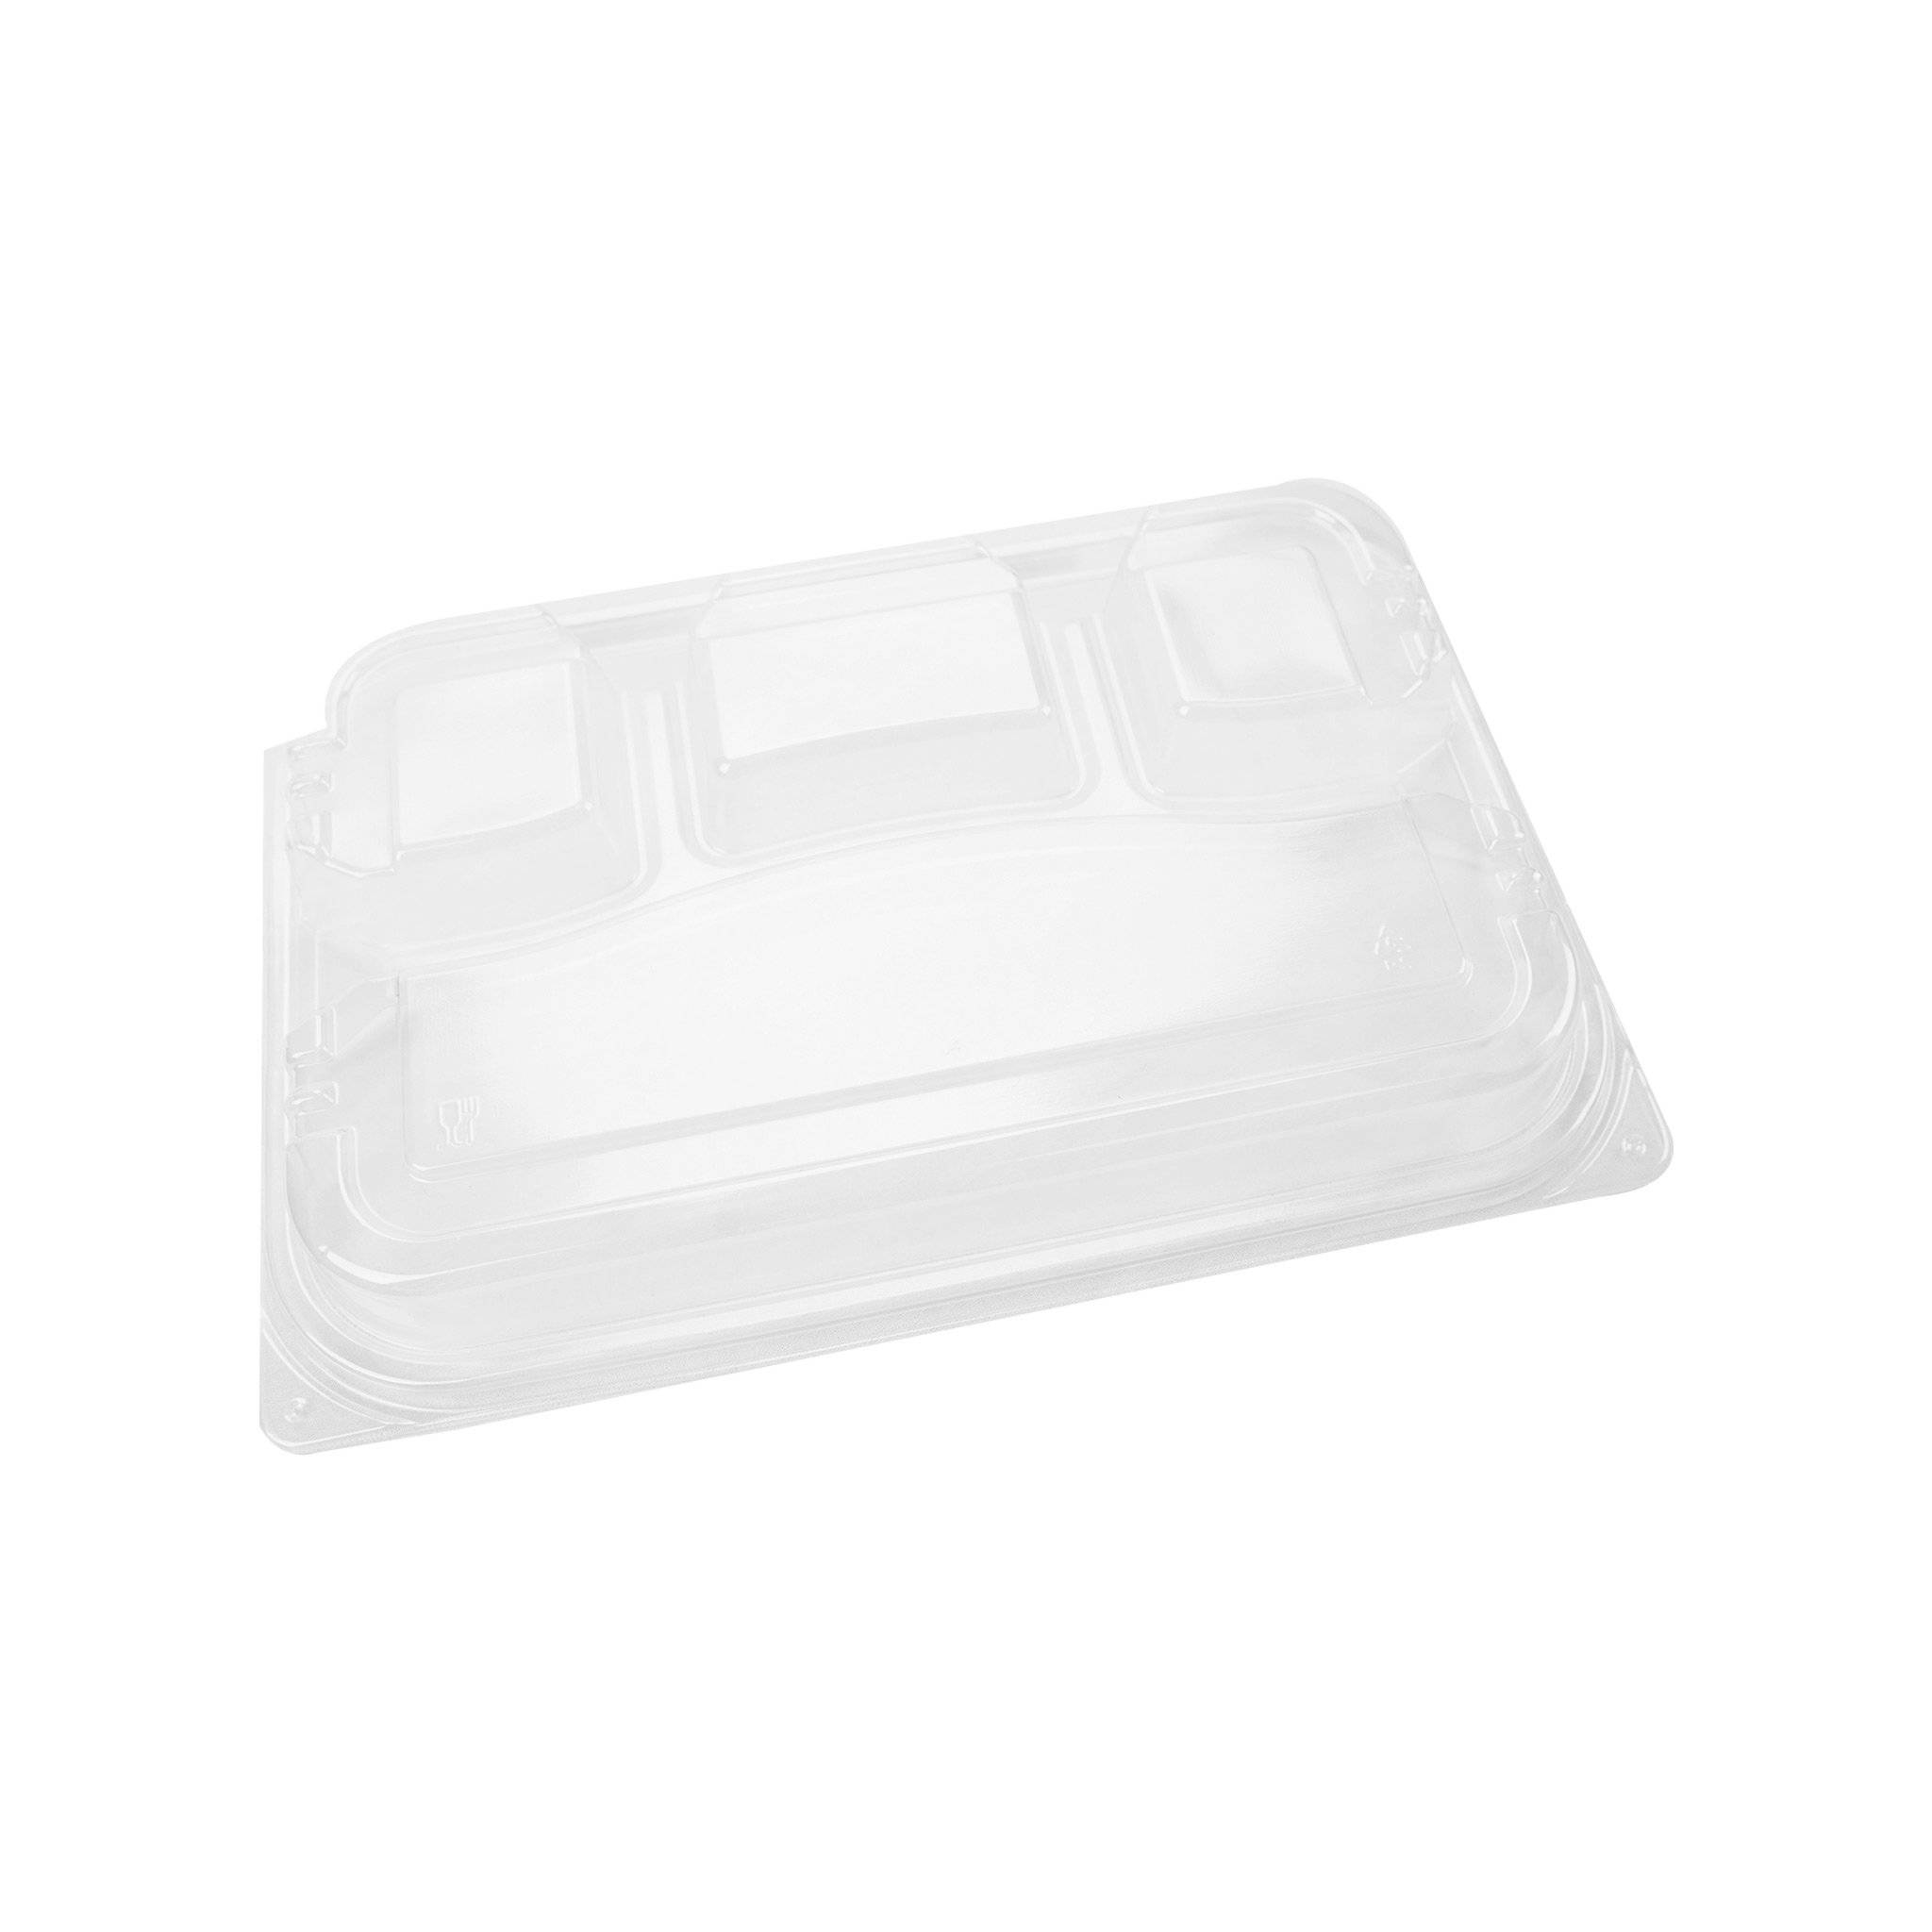 Black Base Rectangular 4-Compartment Container Base Only 200 Pieces - Hotpack Global